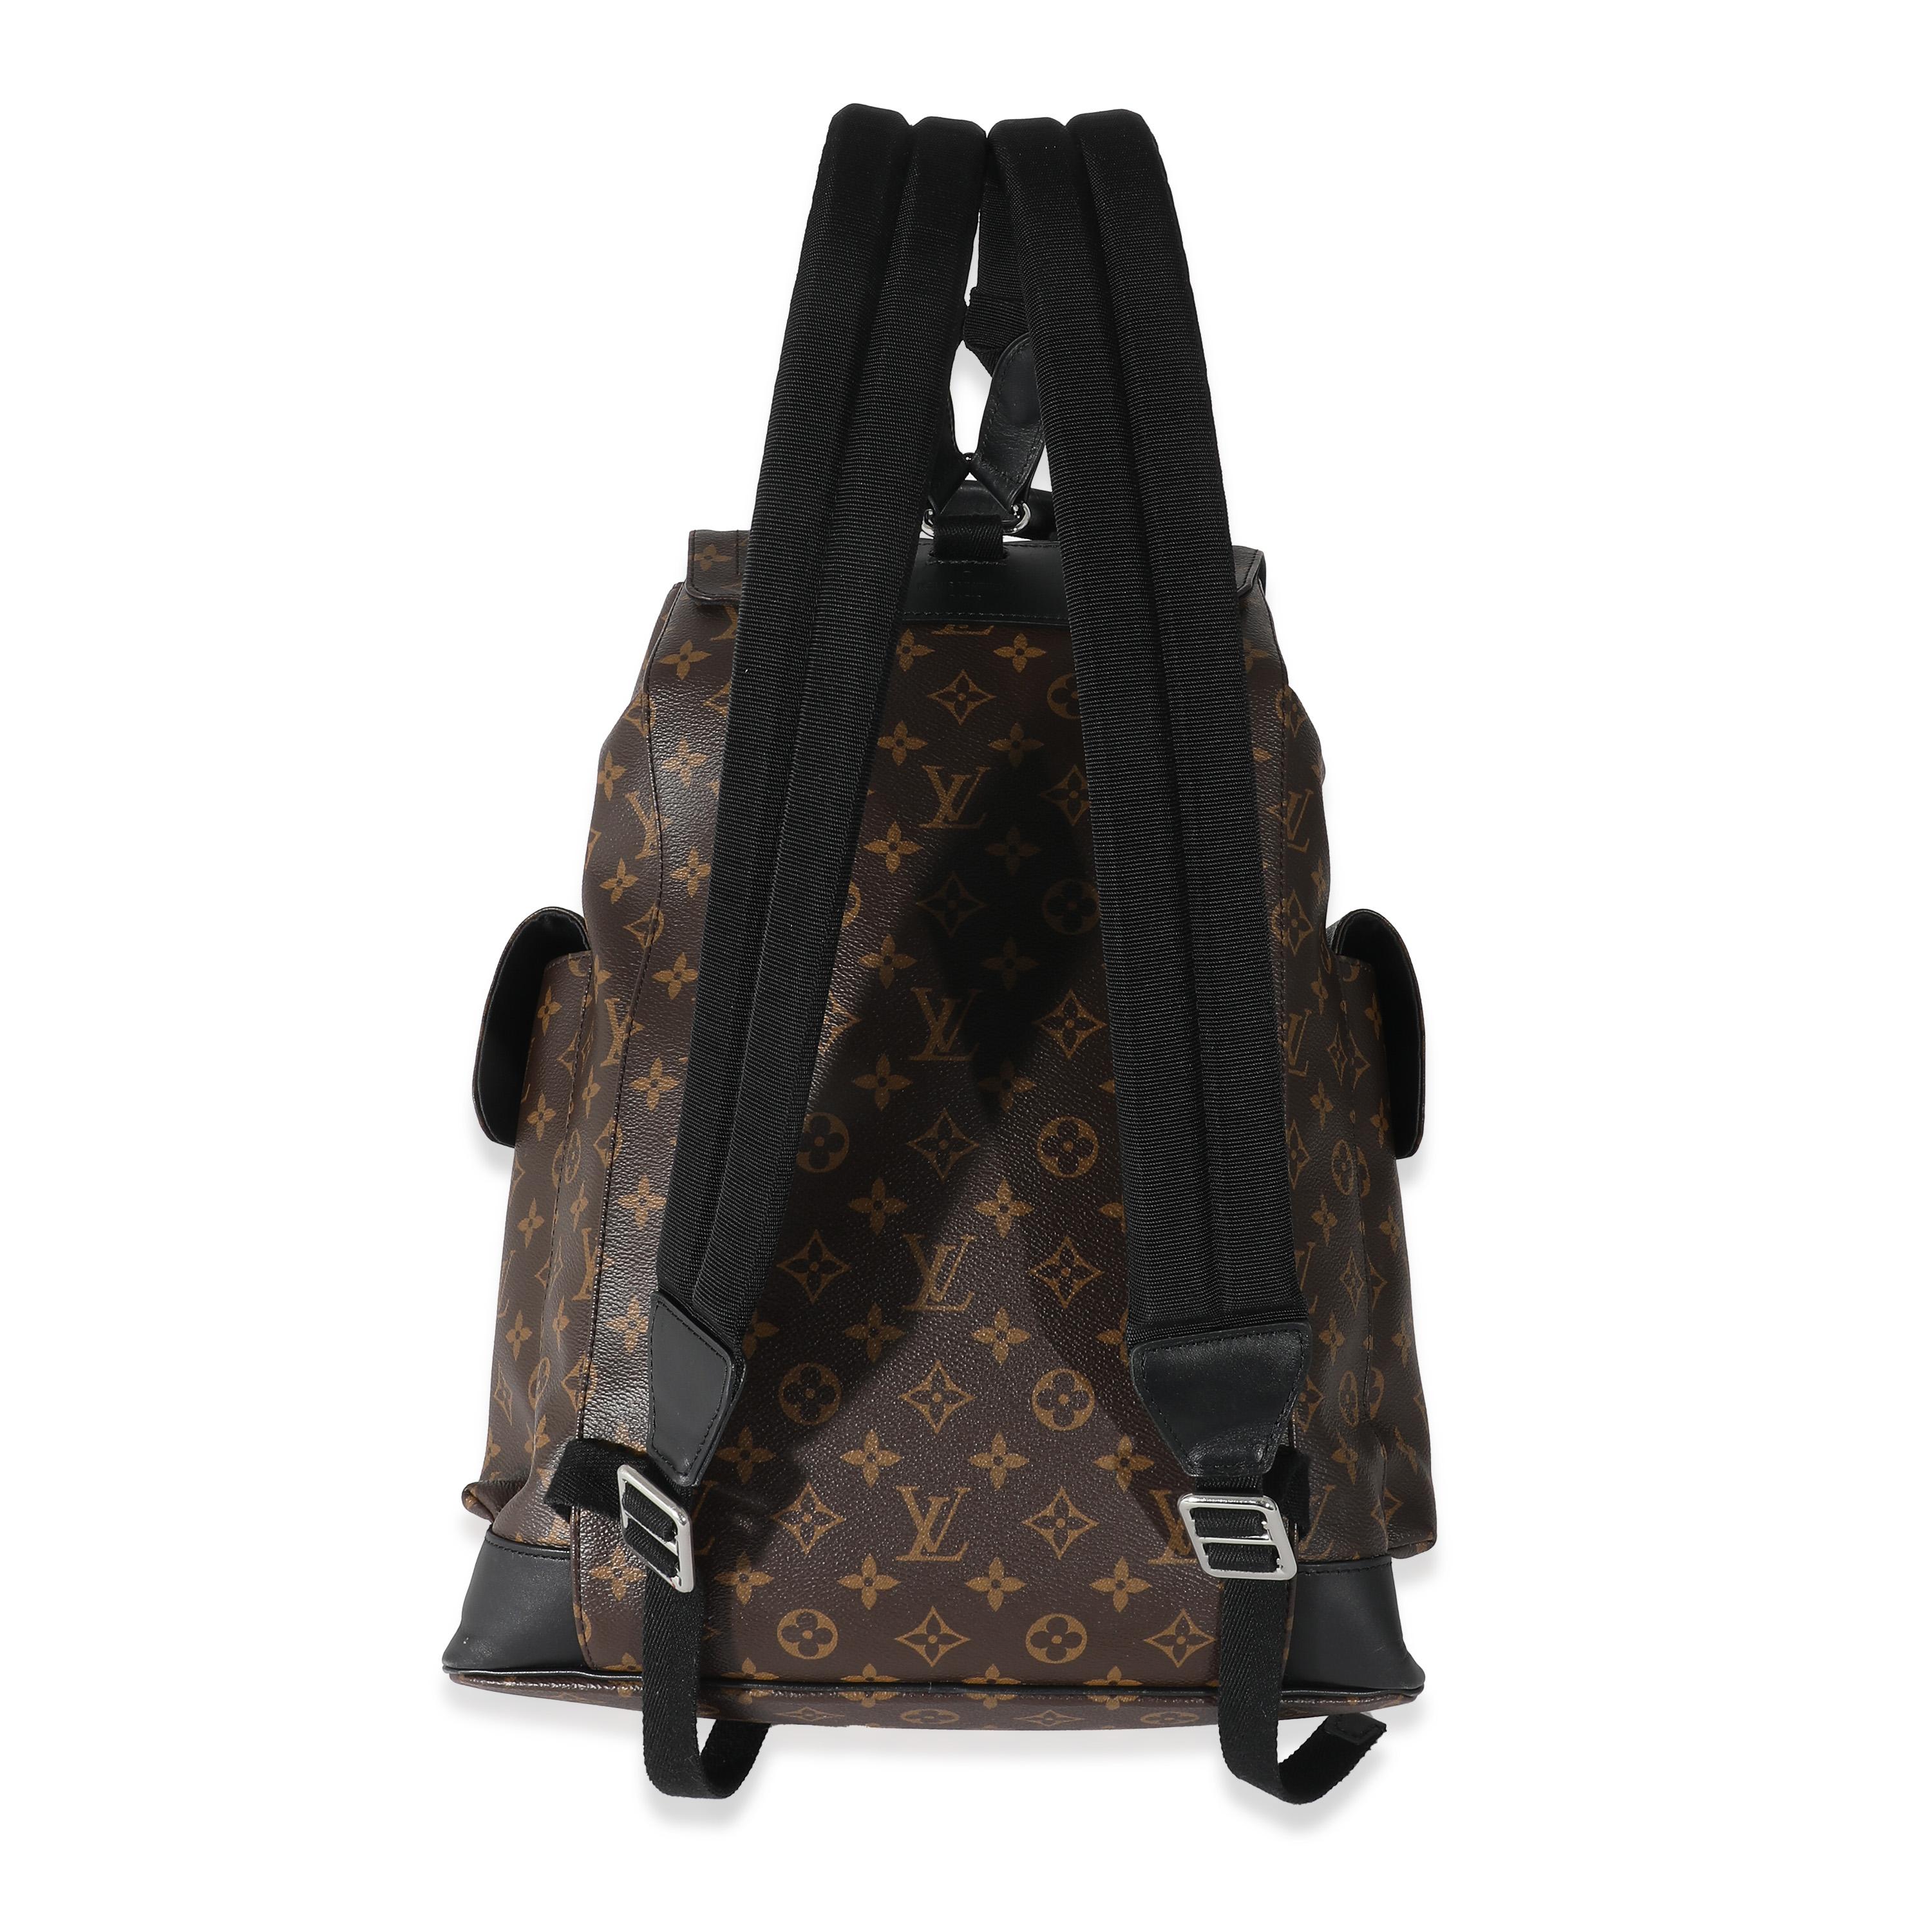 Listing Title: Louis Vuitton Monogram Canvas Macassar Christopher Backpack
SKU: 134313
Condition: Pre-owned 
Handbag Condition: Very Good
Condition Comments: Item is in very good condition with minor signs of wear. Exterior scuffing, marks and